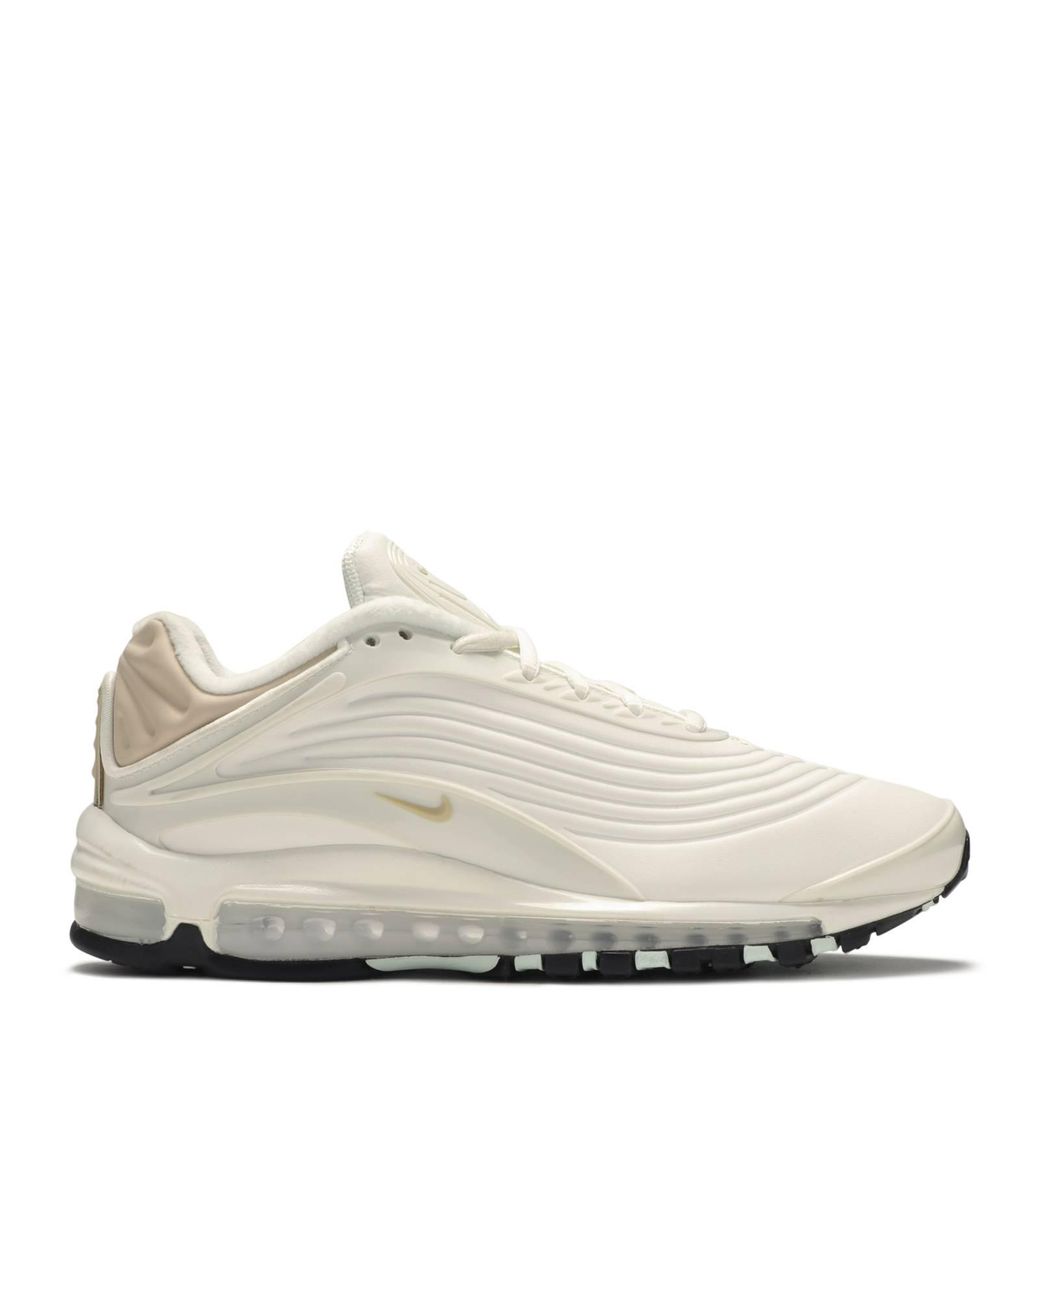 Nike Air Max Deluxe Se Shoes - Size 7.5 